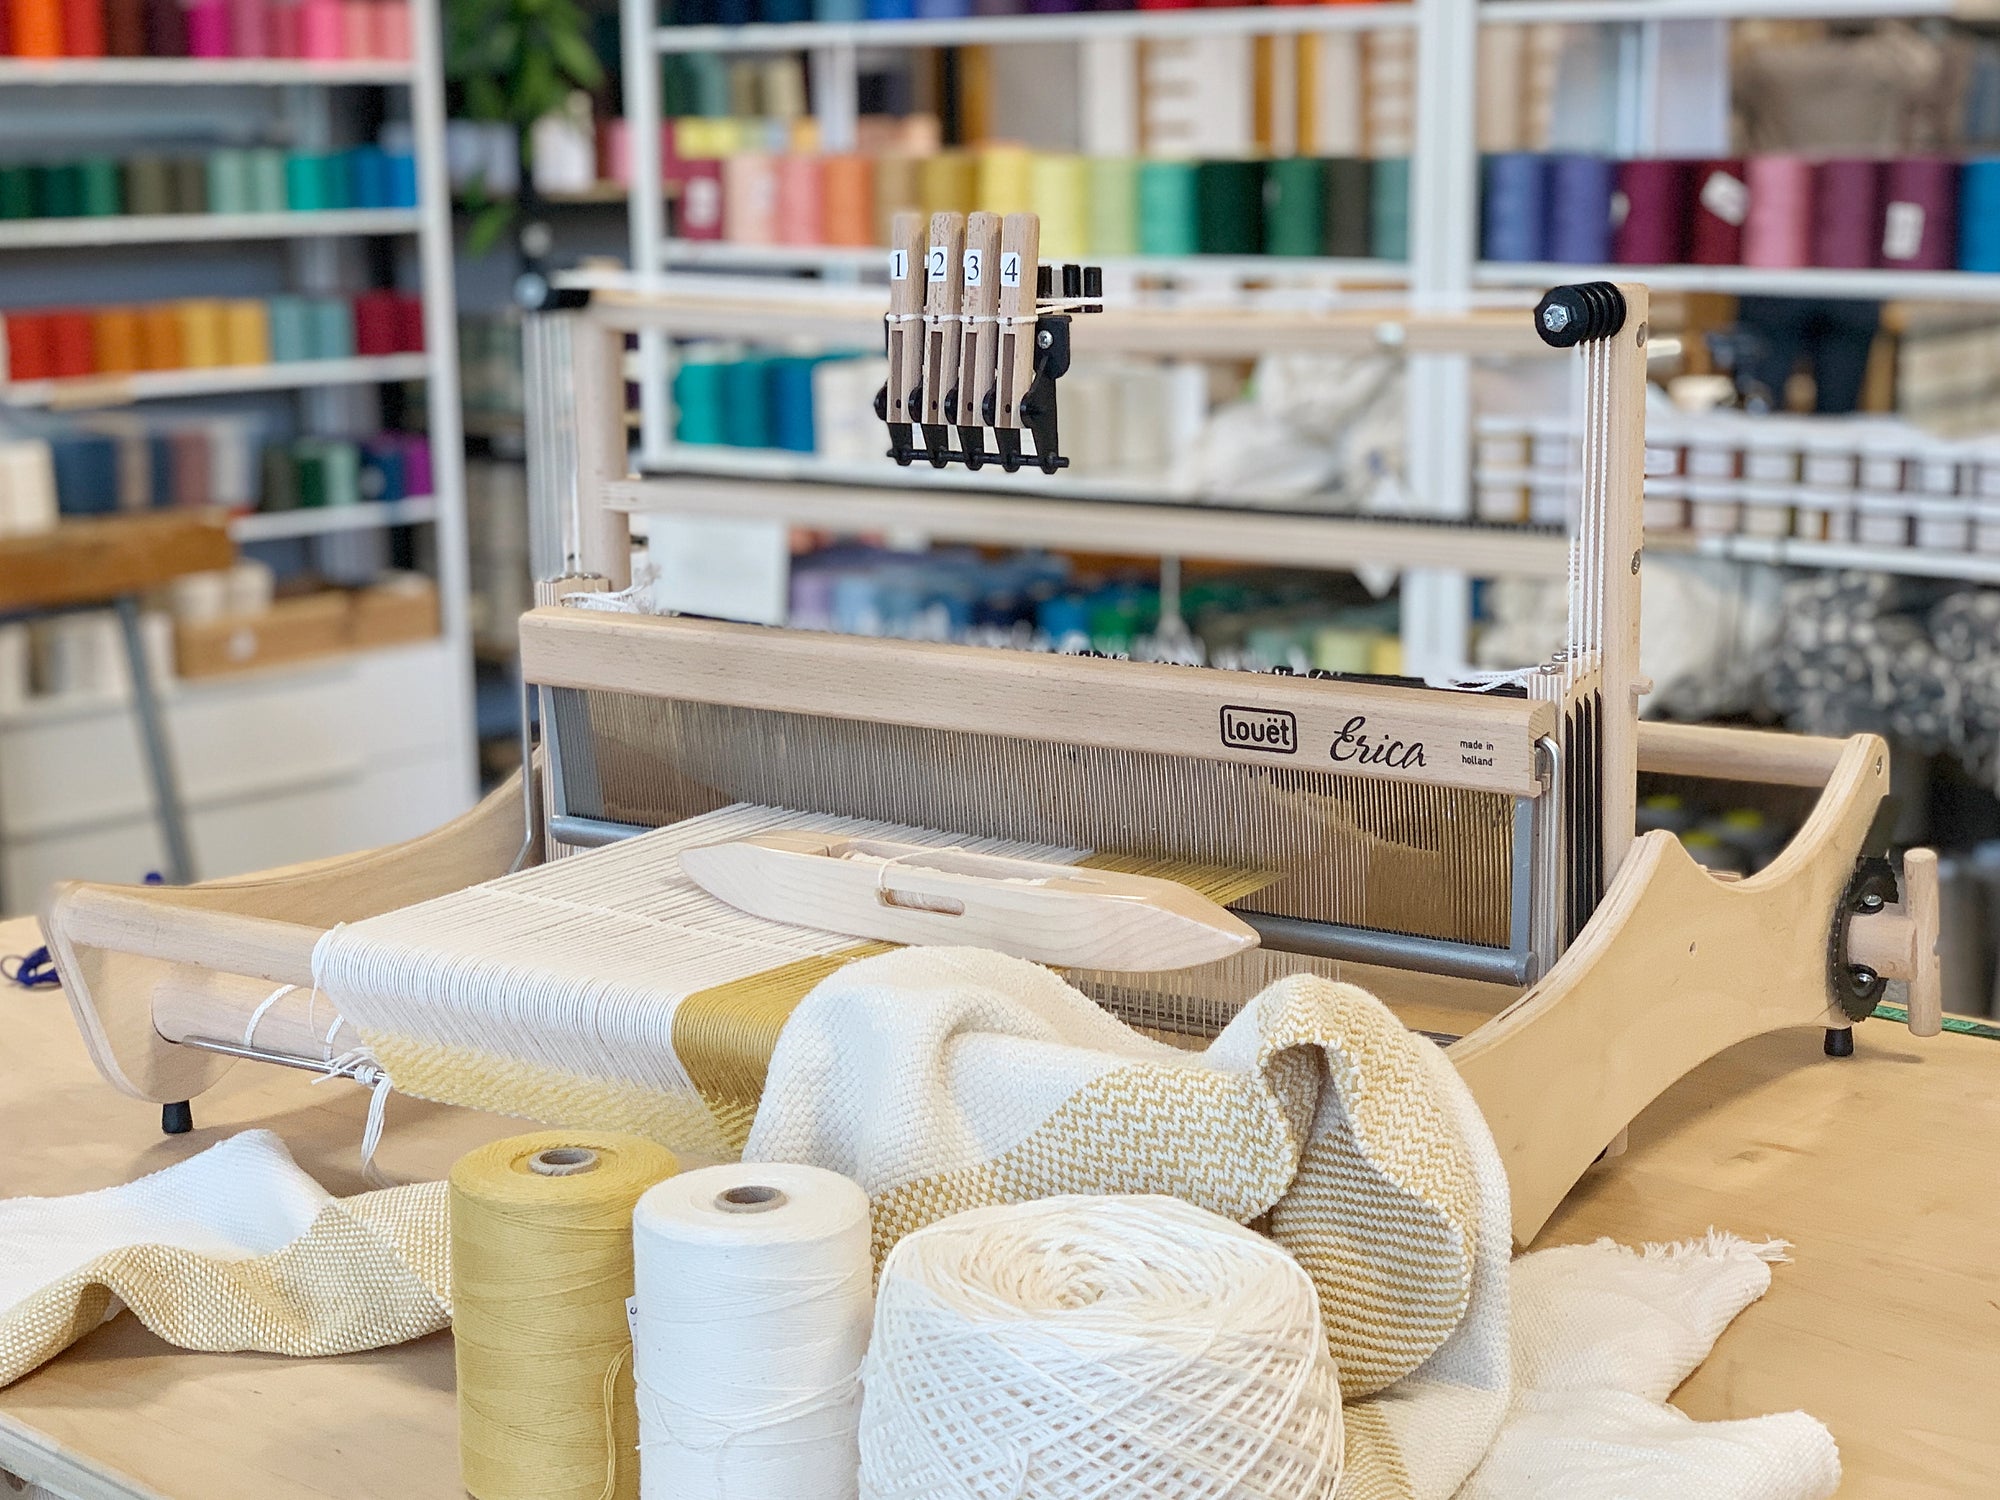 ONLINE COURSE MATERIAL KIT- Learn to Weave on a Four Shaft Loom